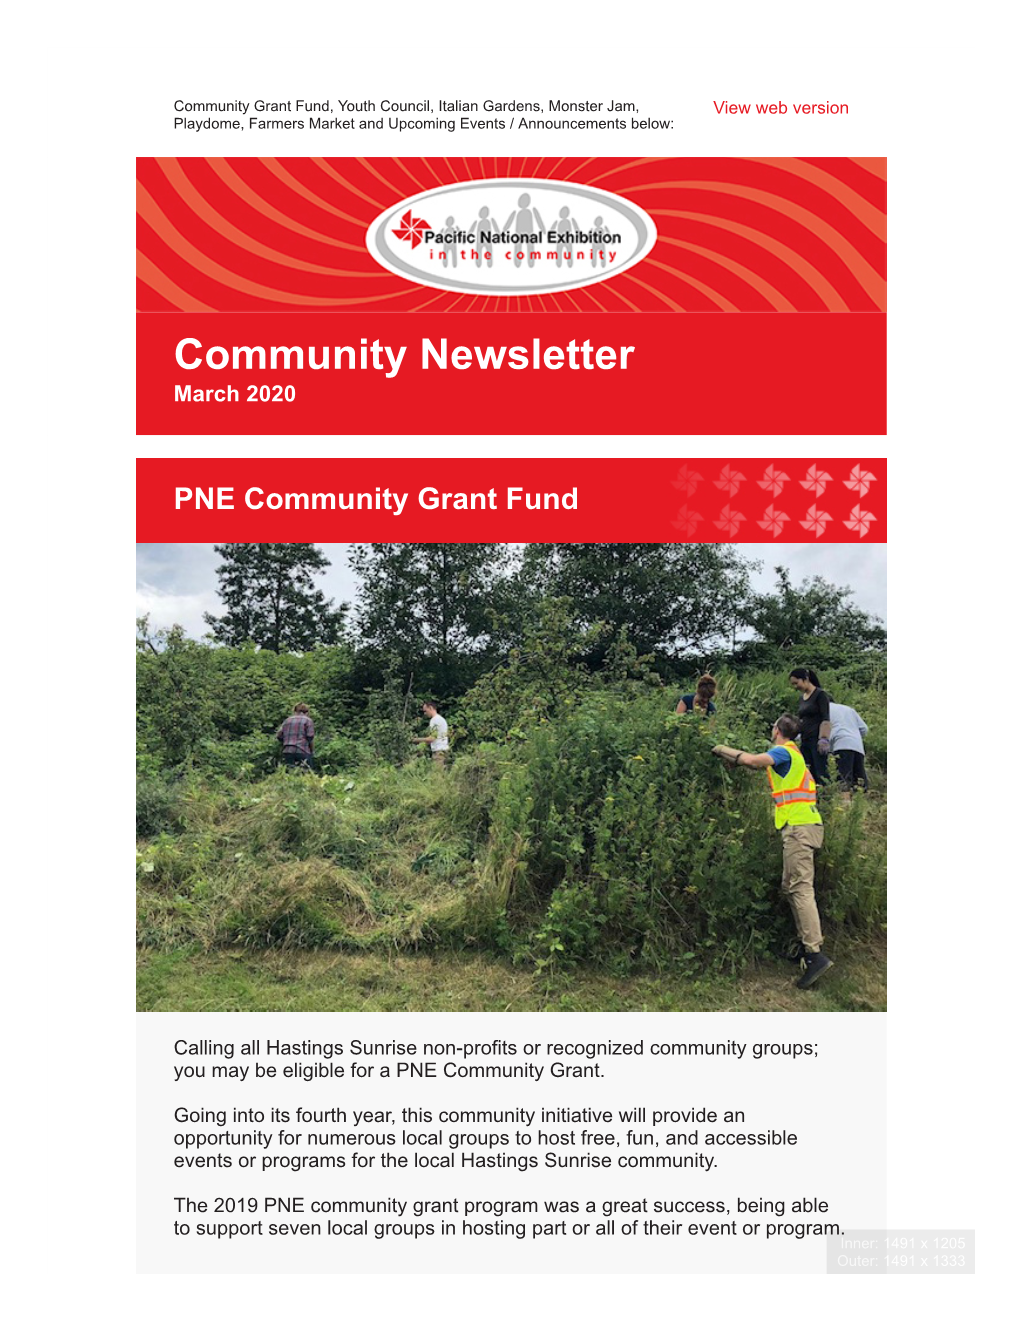 Community Newsletter March 2020